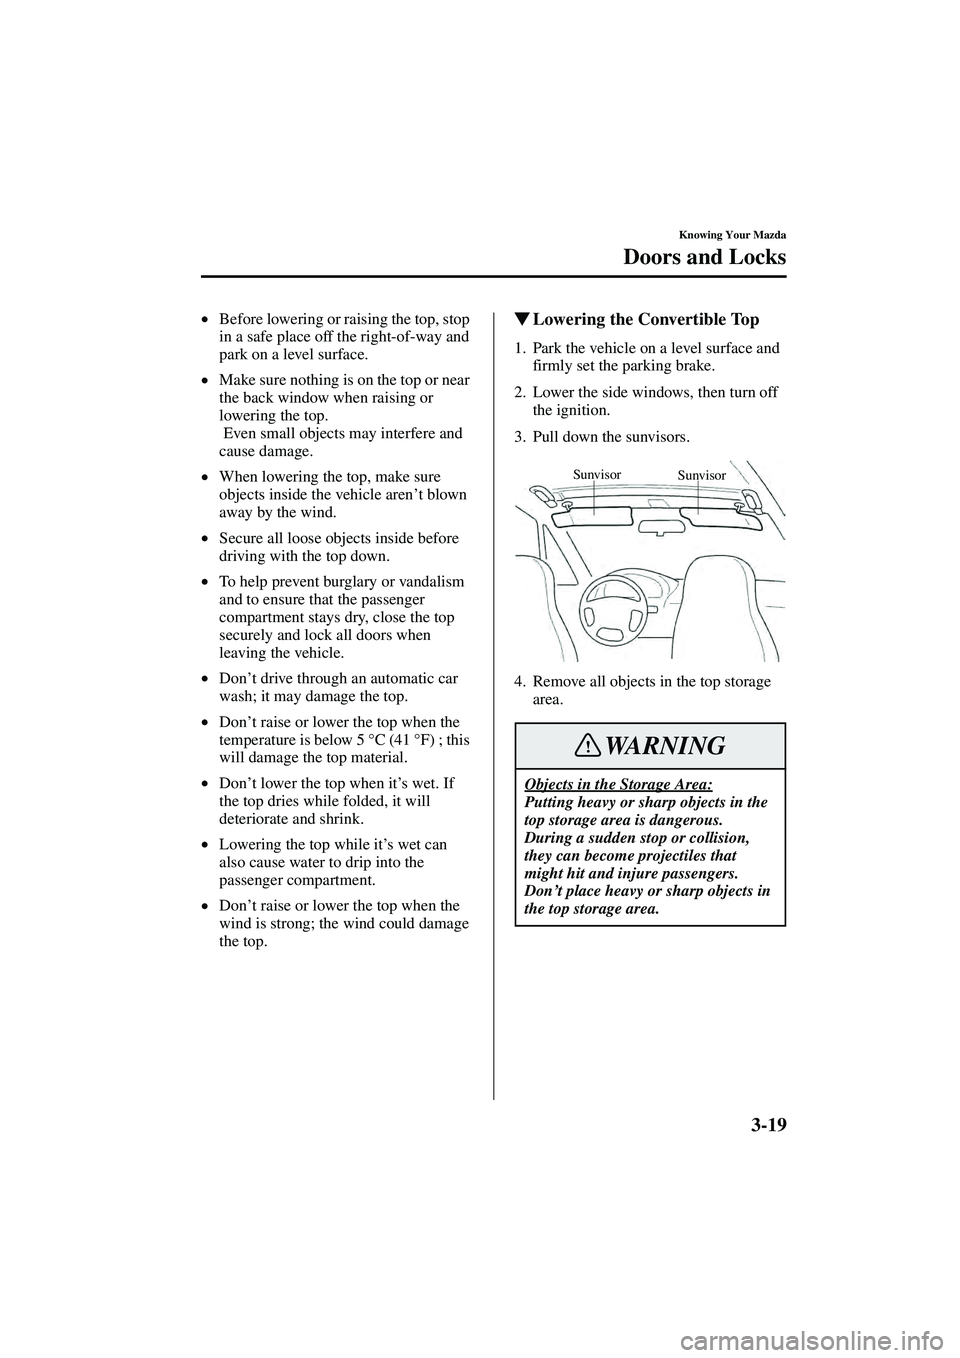 MAZDA MODEL MX-5 MIATA 2004 Workshop Manual 3-19
Knowing Your Mazda
Doors and Locks
Form No. 8S15-EA-03G
•Before lowering or raising the top, stop 
in a safe place off the right-of-way and 
park on a level surface.
• Make sure nothing is on